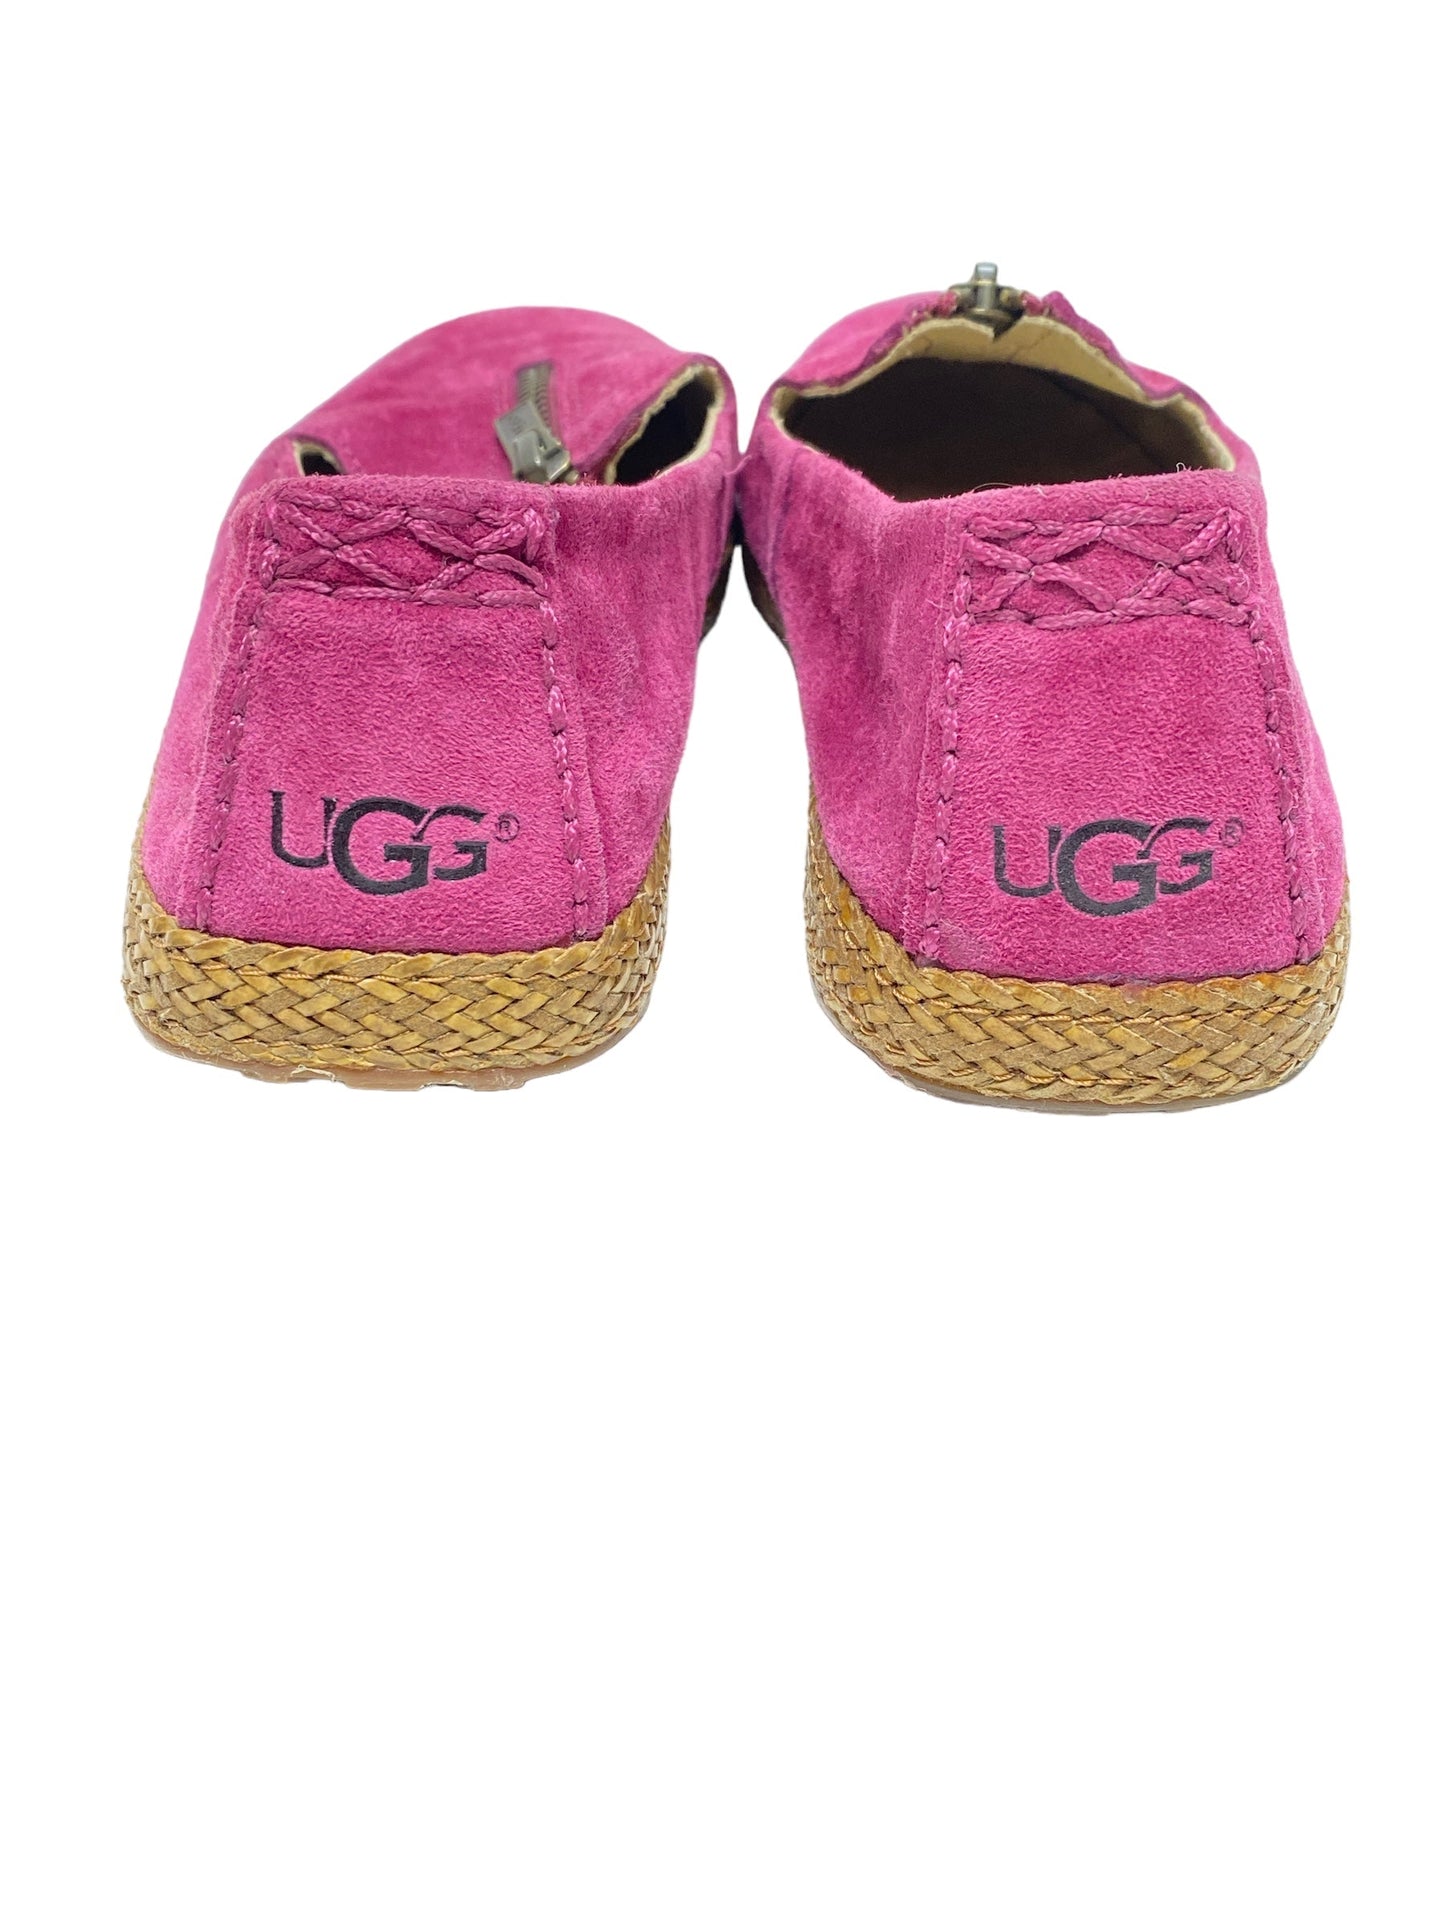 Shoes Flats By Ugg  Size: 6.5